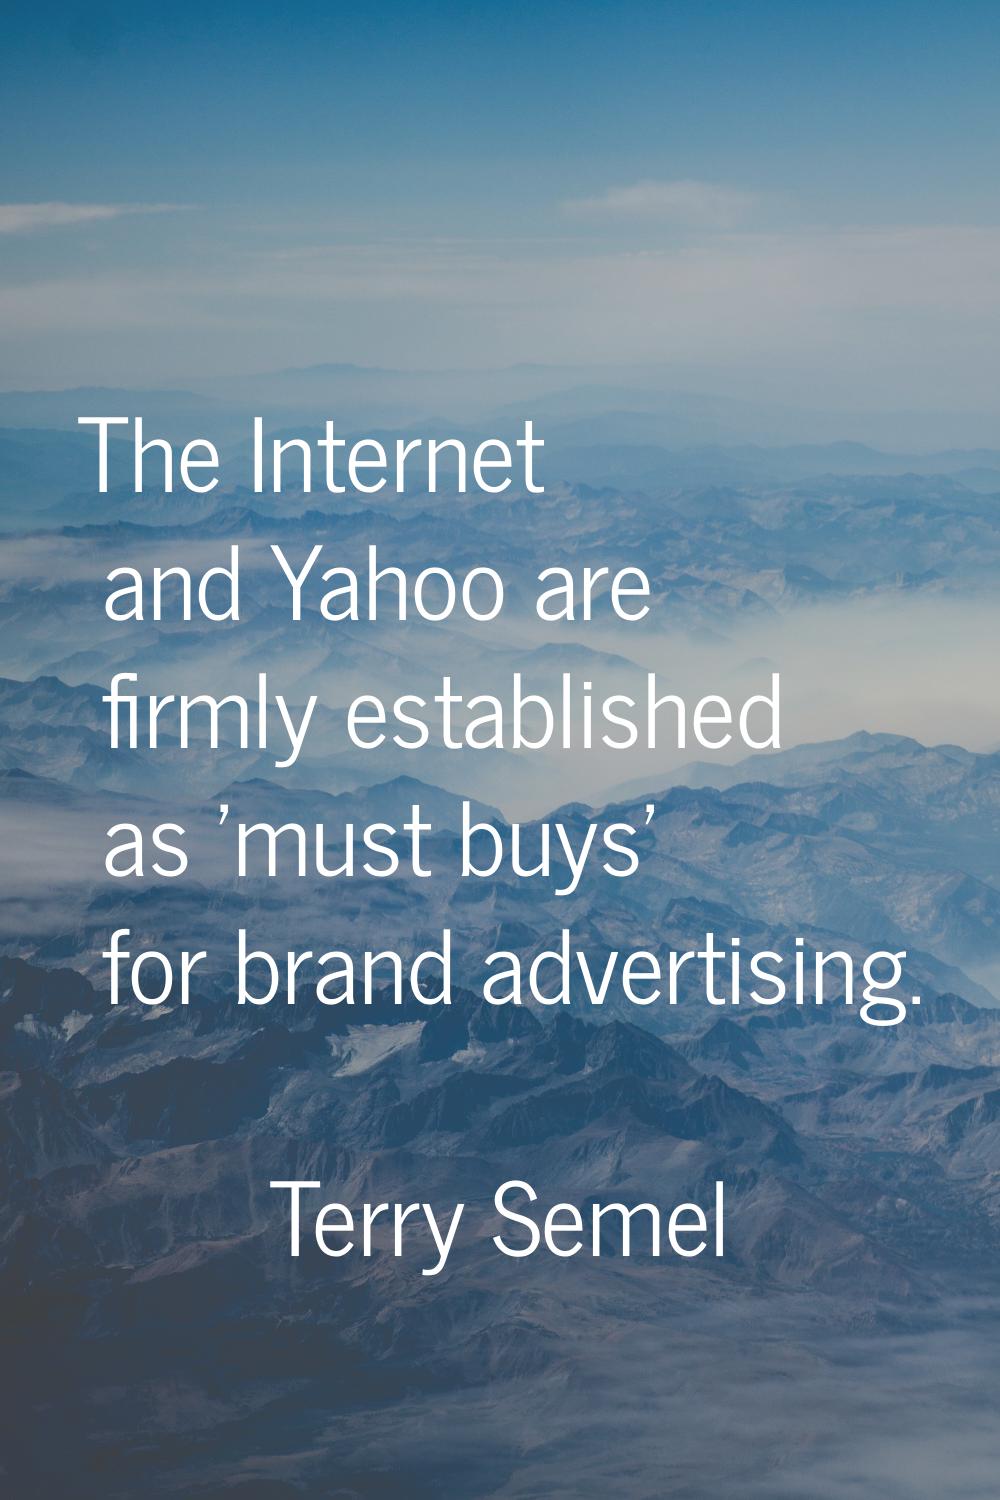 The Internet and Yahoo are firmly established as 'must buys' for brand advertising.